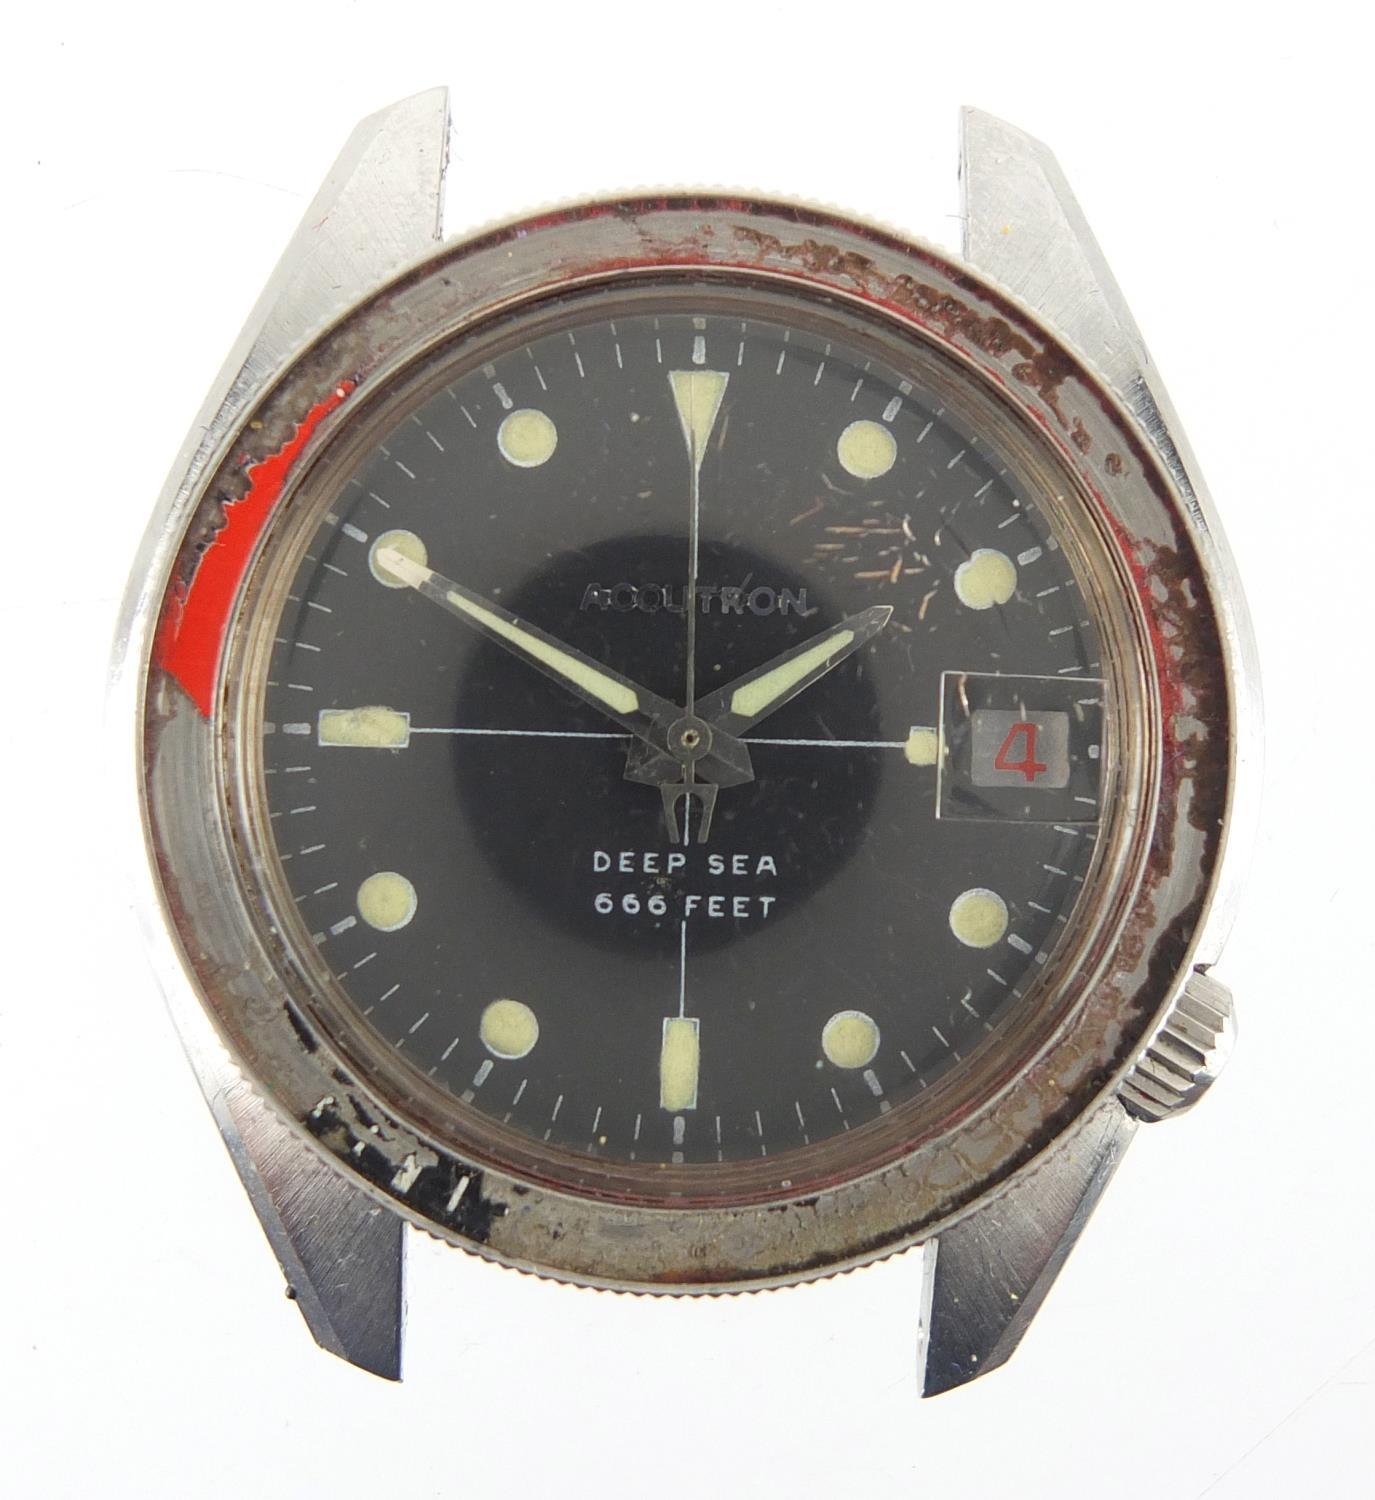 Vintage gentleman's Bulova Accutron Deep Sea wristwatch with date dial, luminous hands and marks,